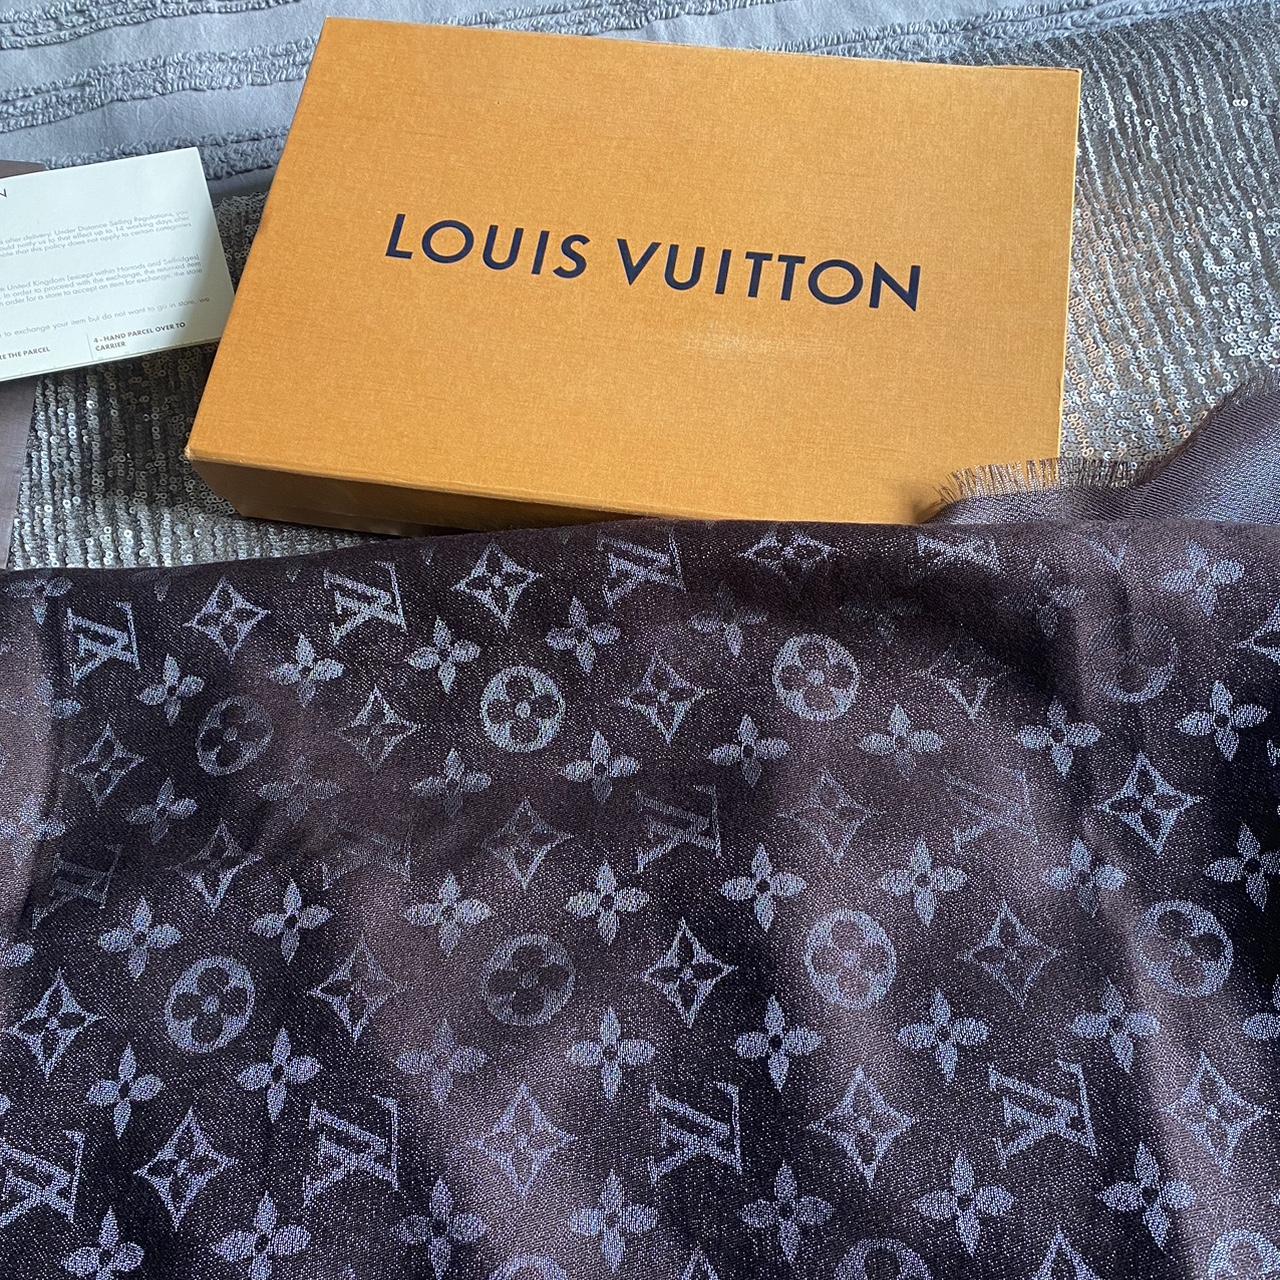 Louis Vuitton scarf/shawl New without tags Unwanted - Depop